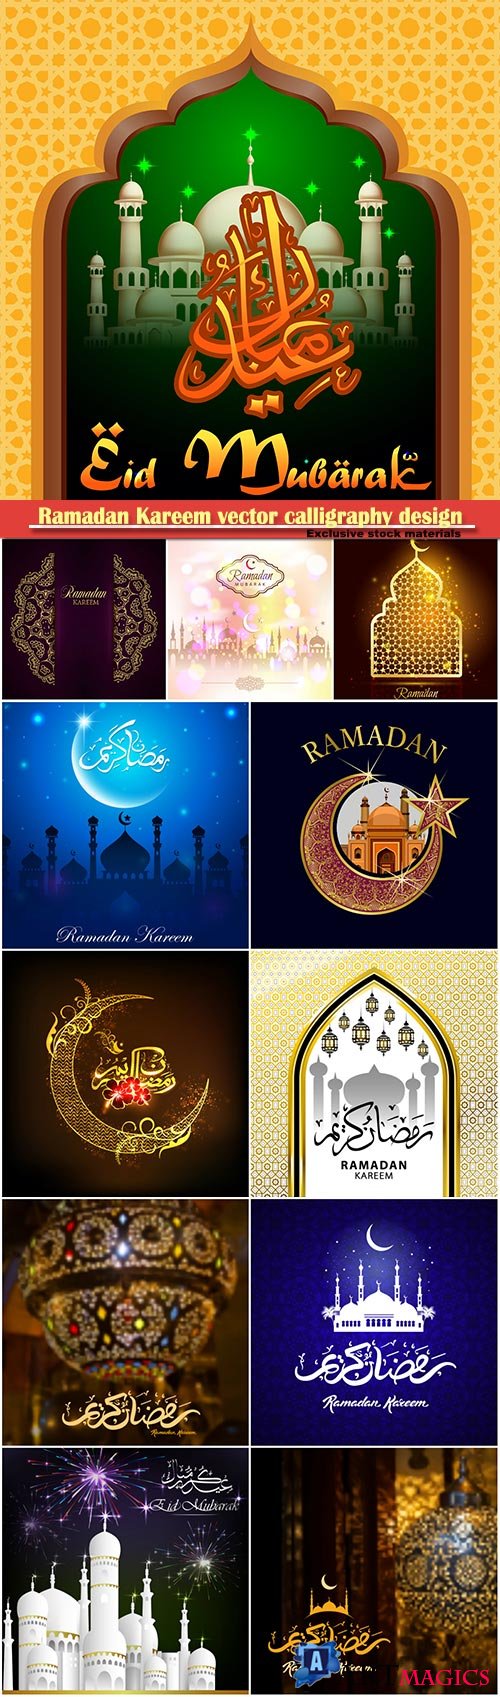 Ramadan Kareem vector calligraphy design with decorative floral pattern, mosque silhouette, crescent and glittering islamic background # 19